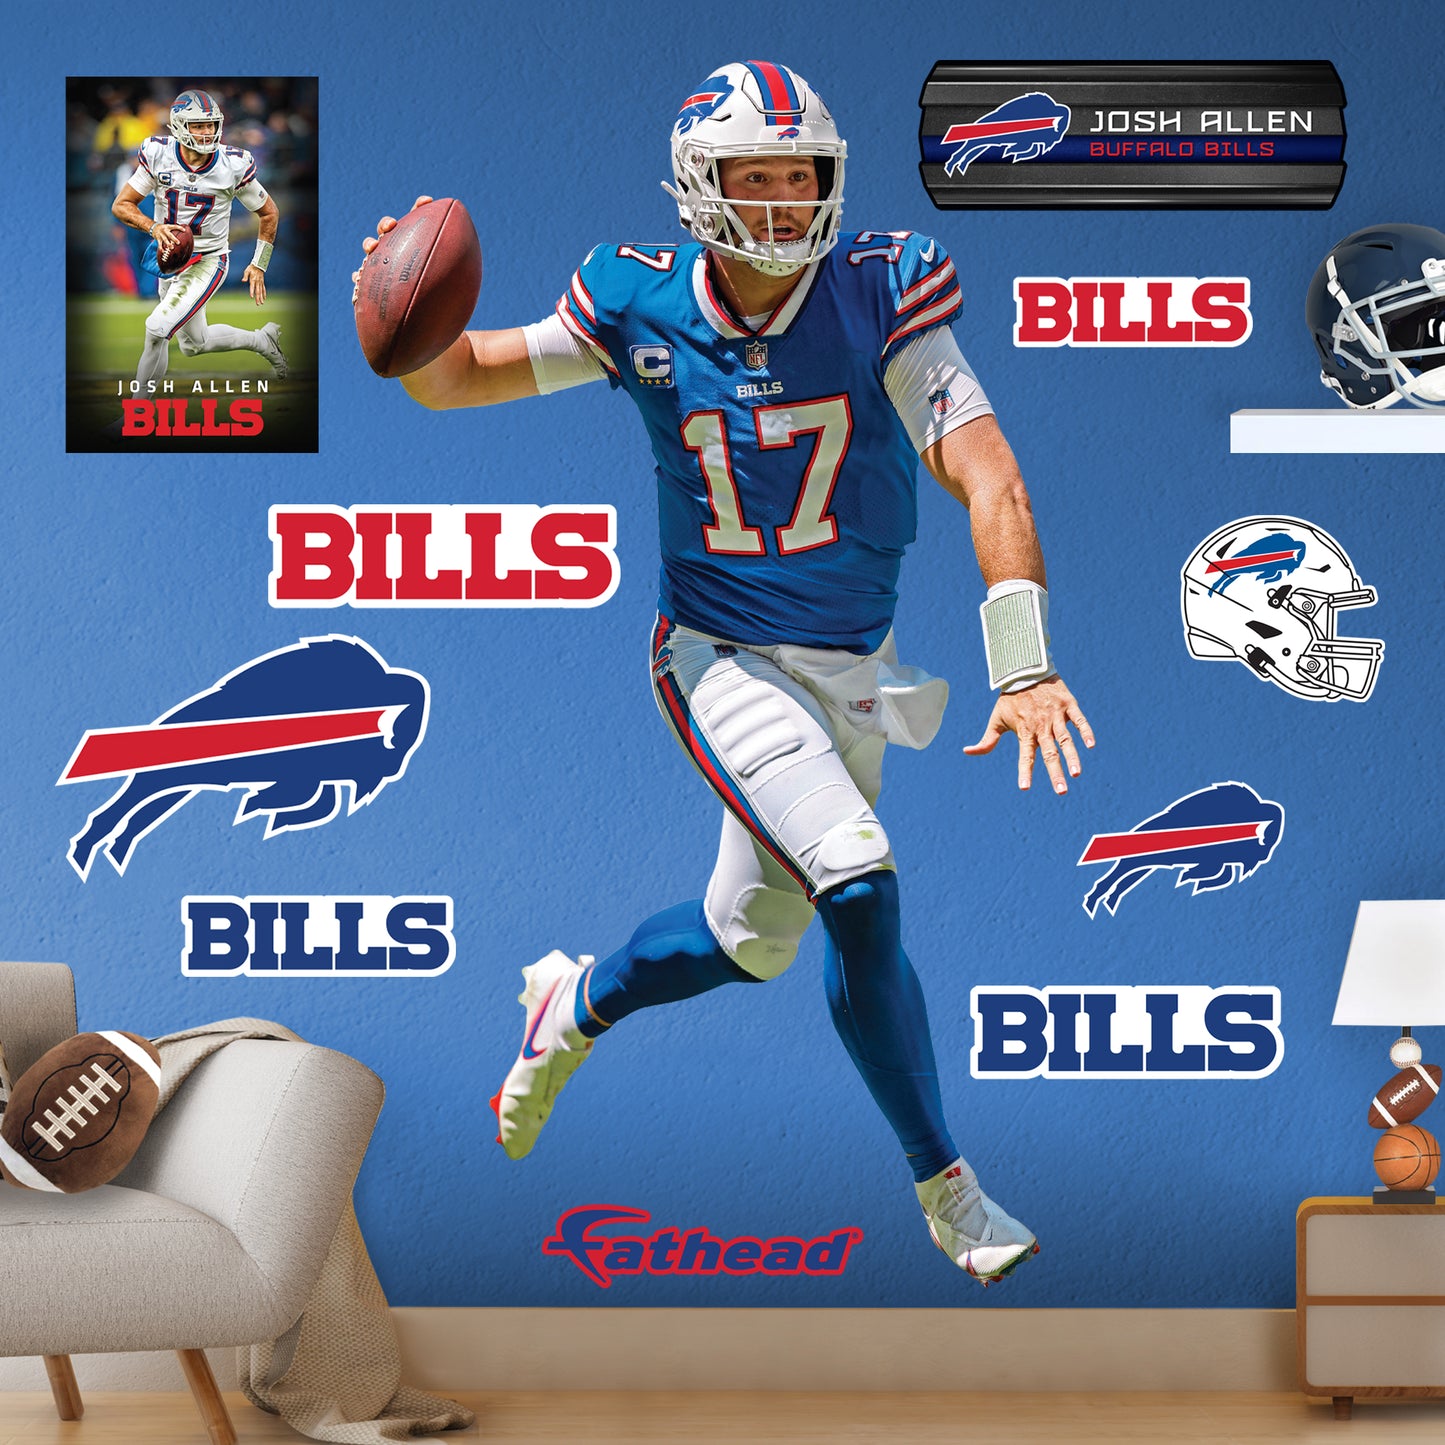 Buffalo Bills: Josh Allen Stand Out - Officially Licensed NFL